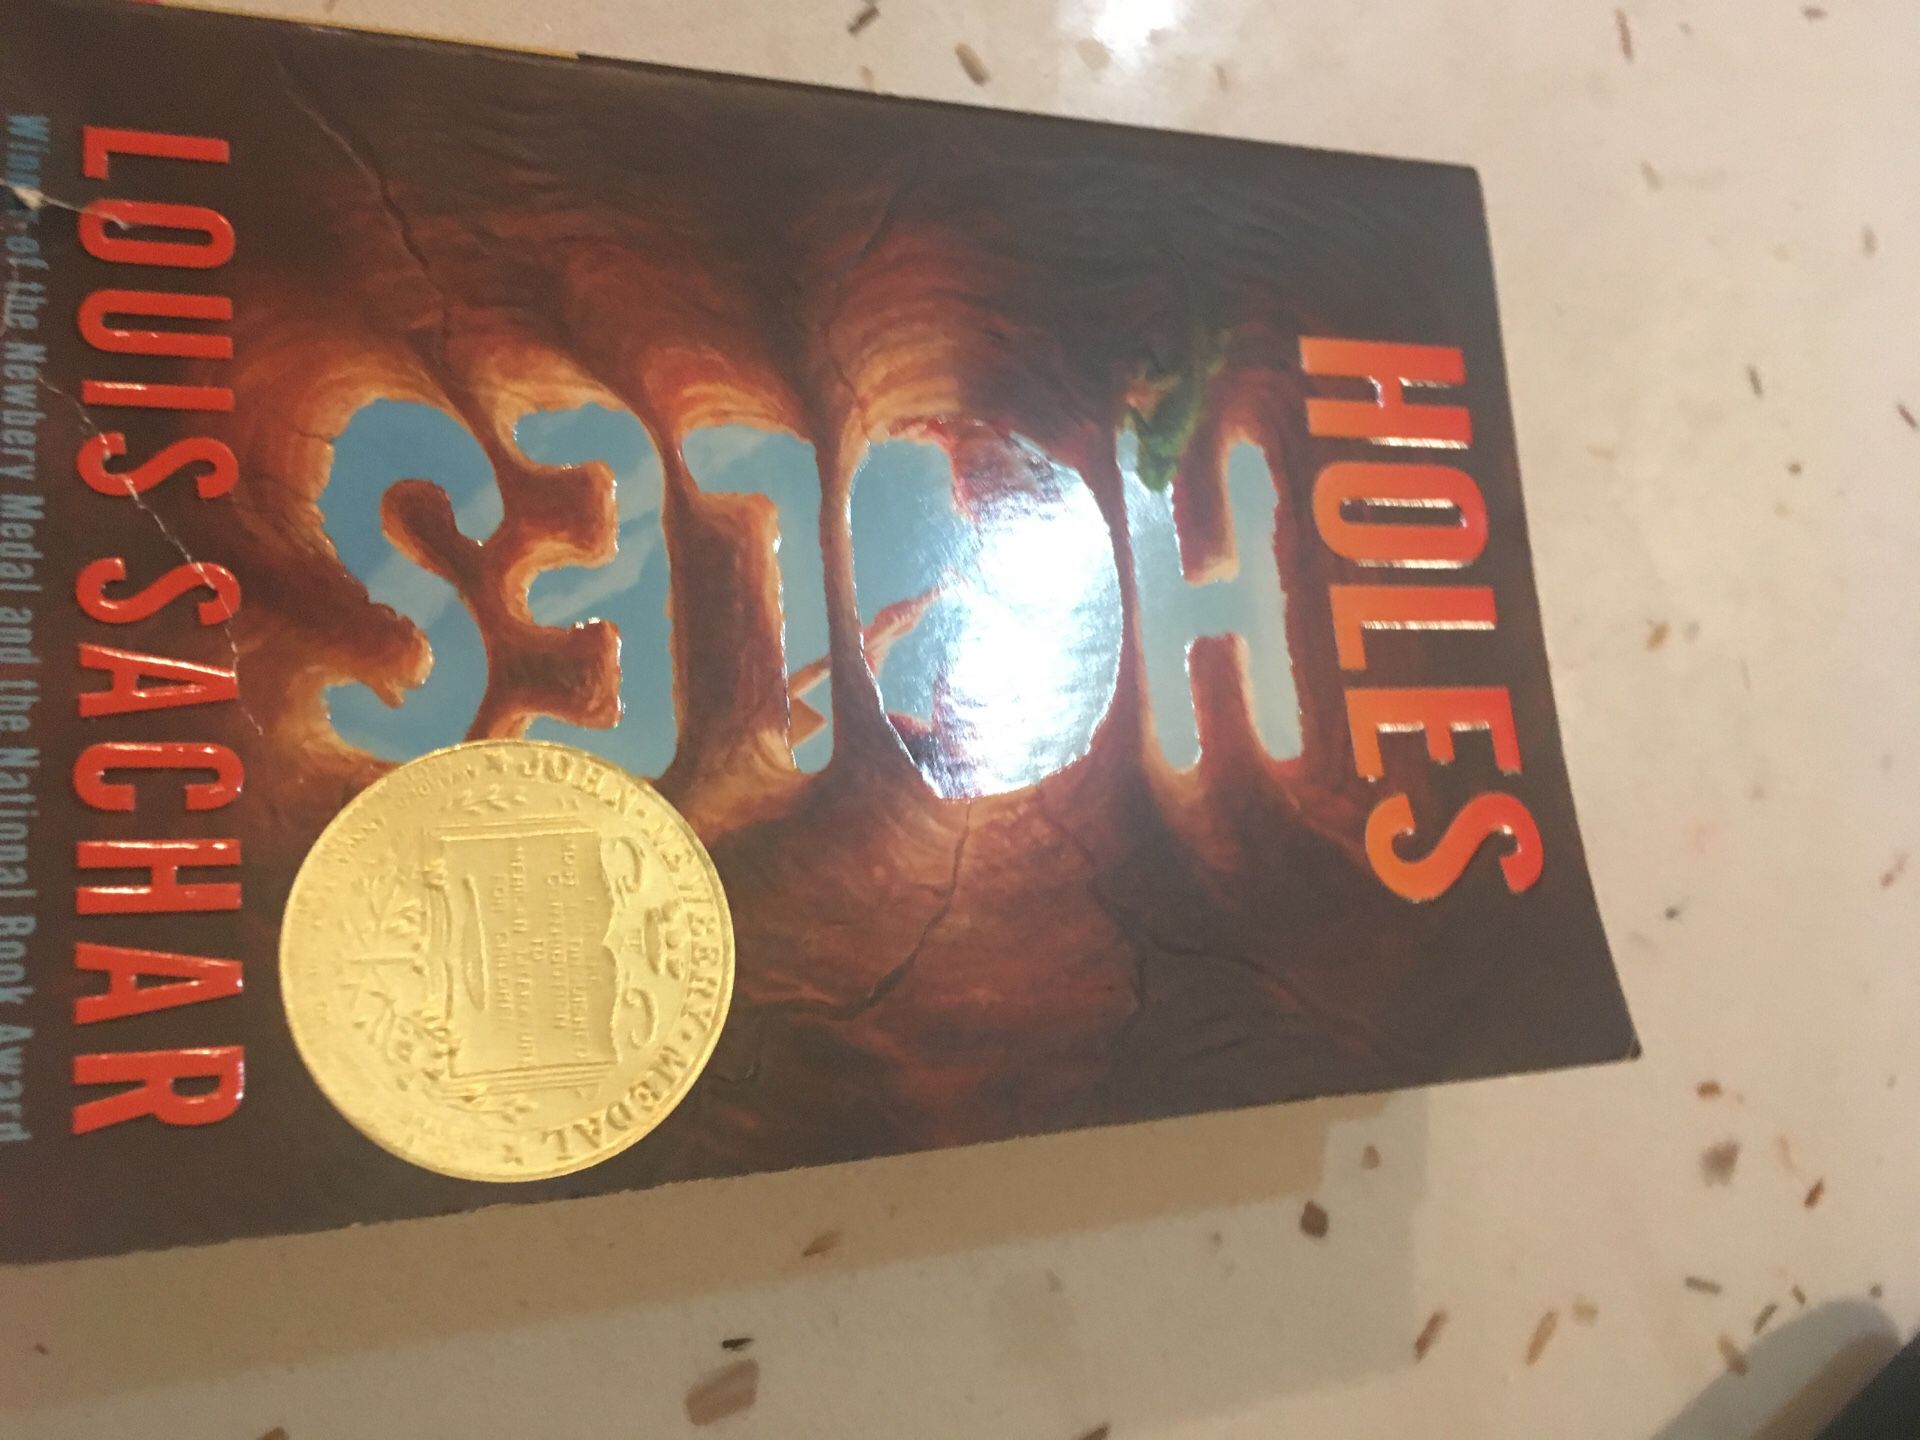 Holes By Louis Sachar Book for Sale in Brooklyn, NY - OfferUp